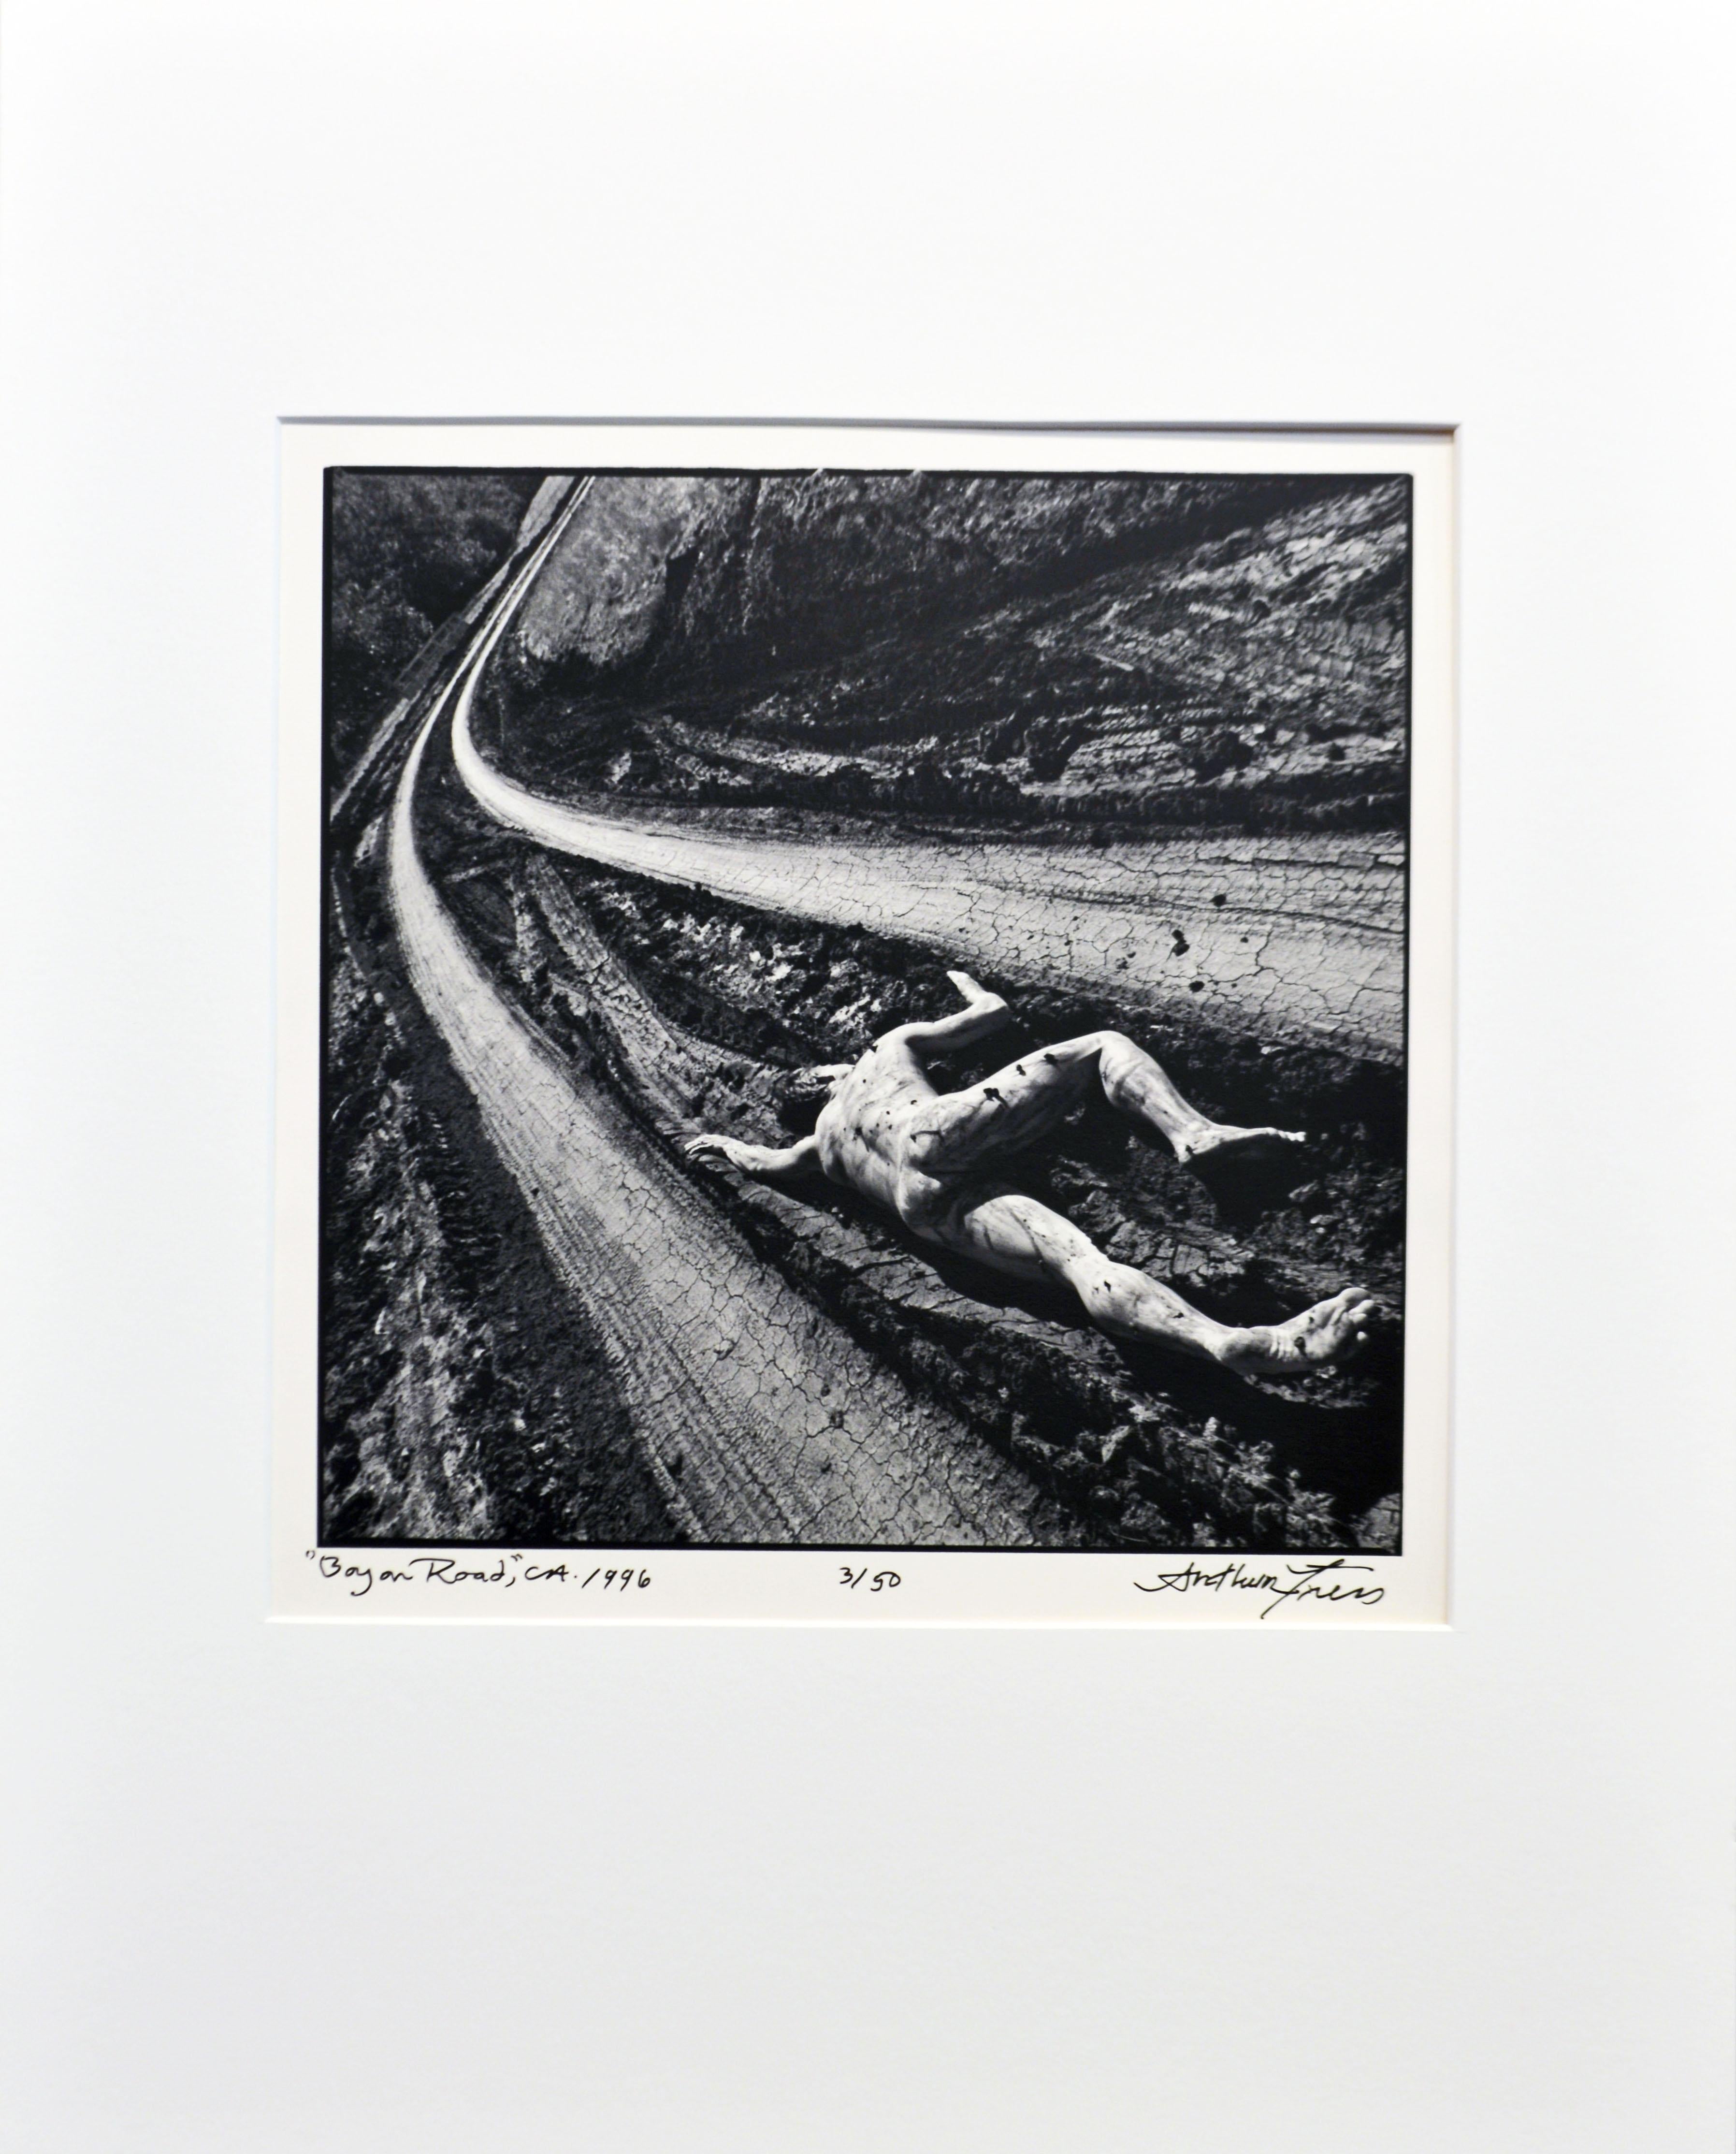 Arthur Tress (American b. 1940)
'Hockey Boy on Road 1996' Signed, numbered and titled recto in margin under image. Gelatin silver print. Image: 10 x 10 in / 25.5 x 25.5 cm. Full margins. Mat: 16 x 20 in / 41 x 51 cm. This work is included full page